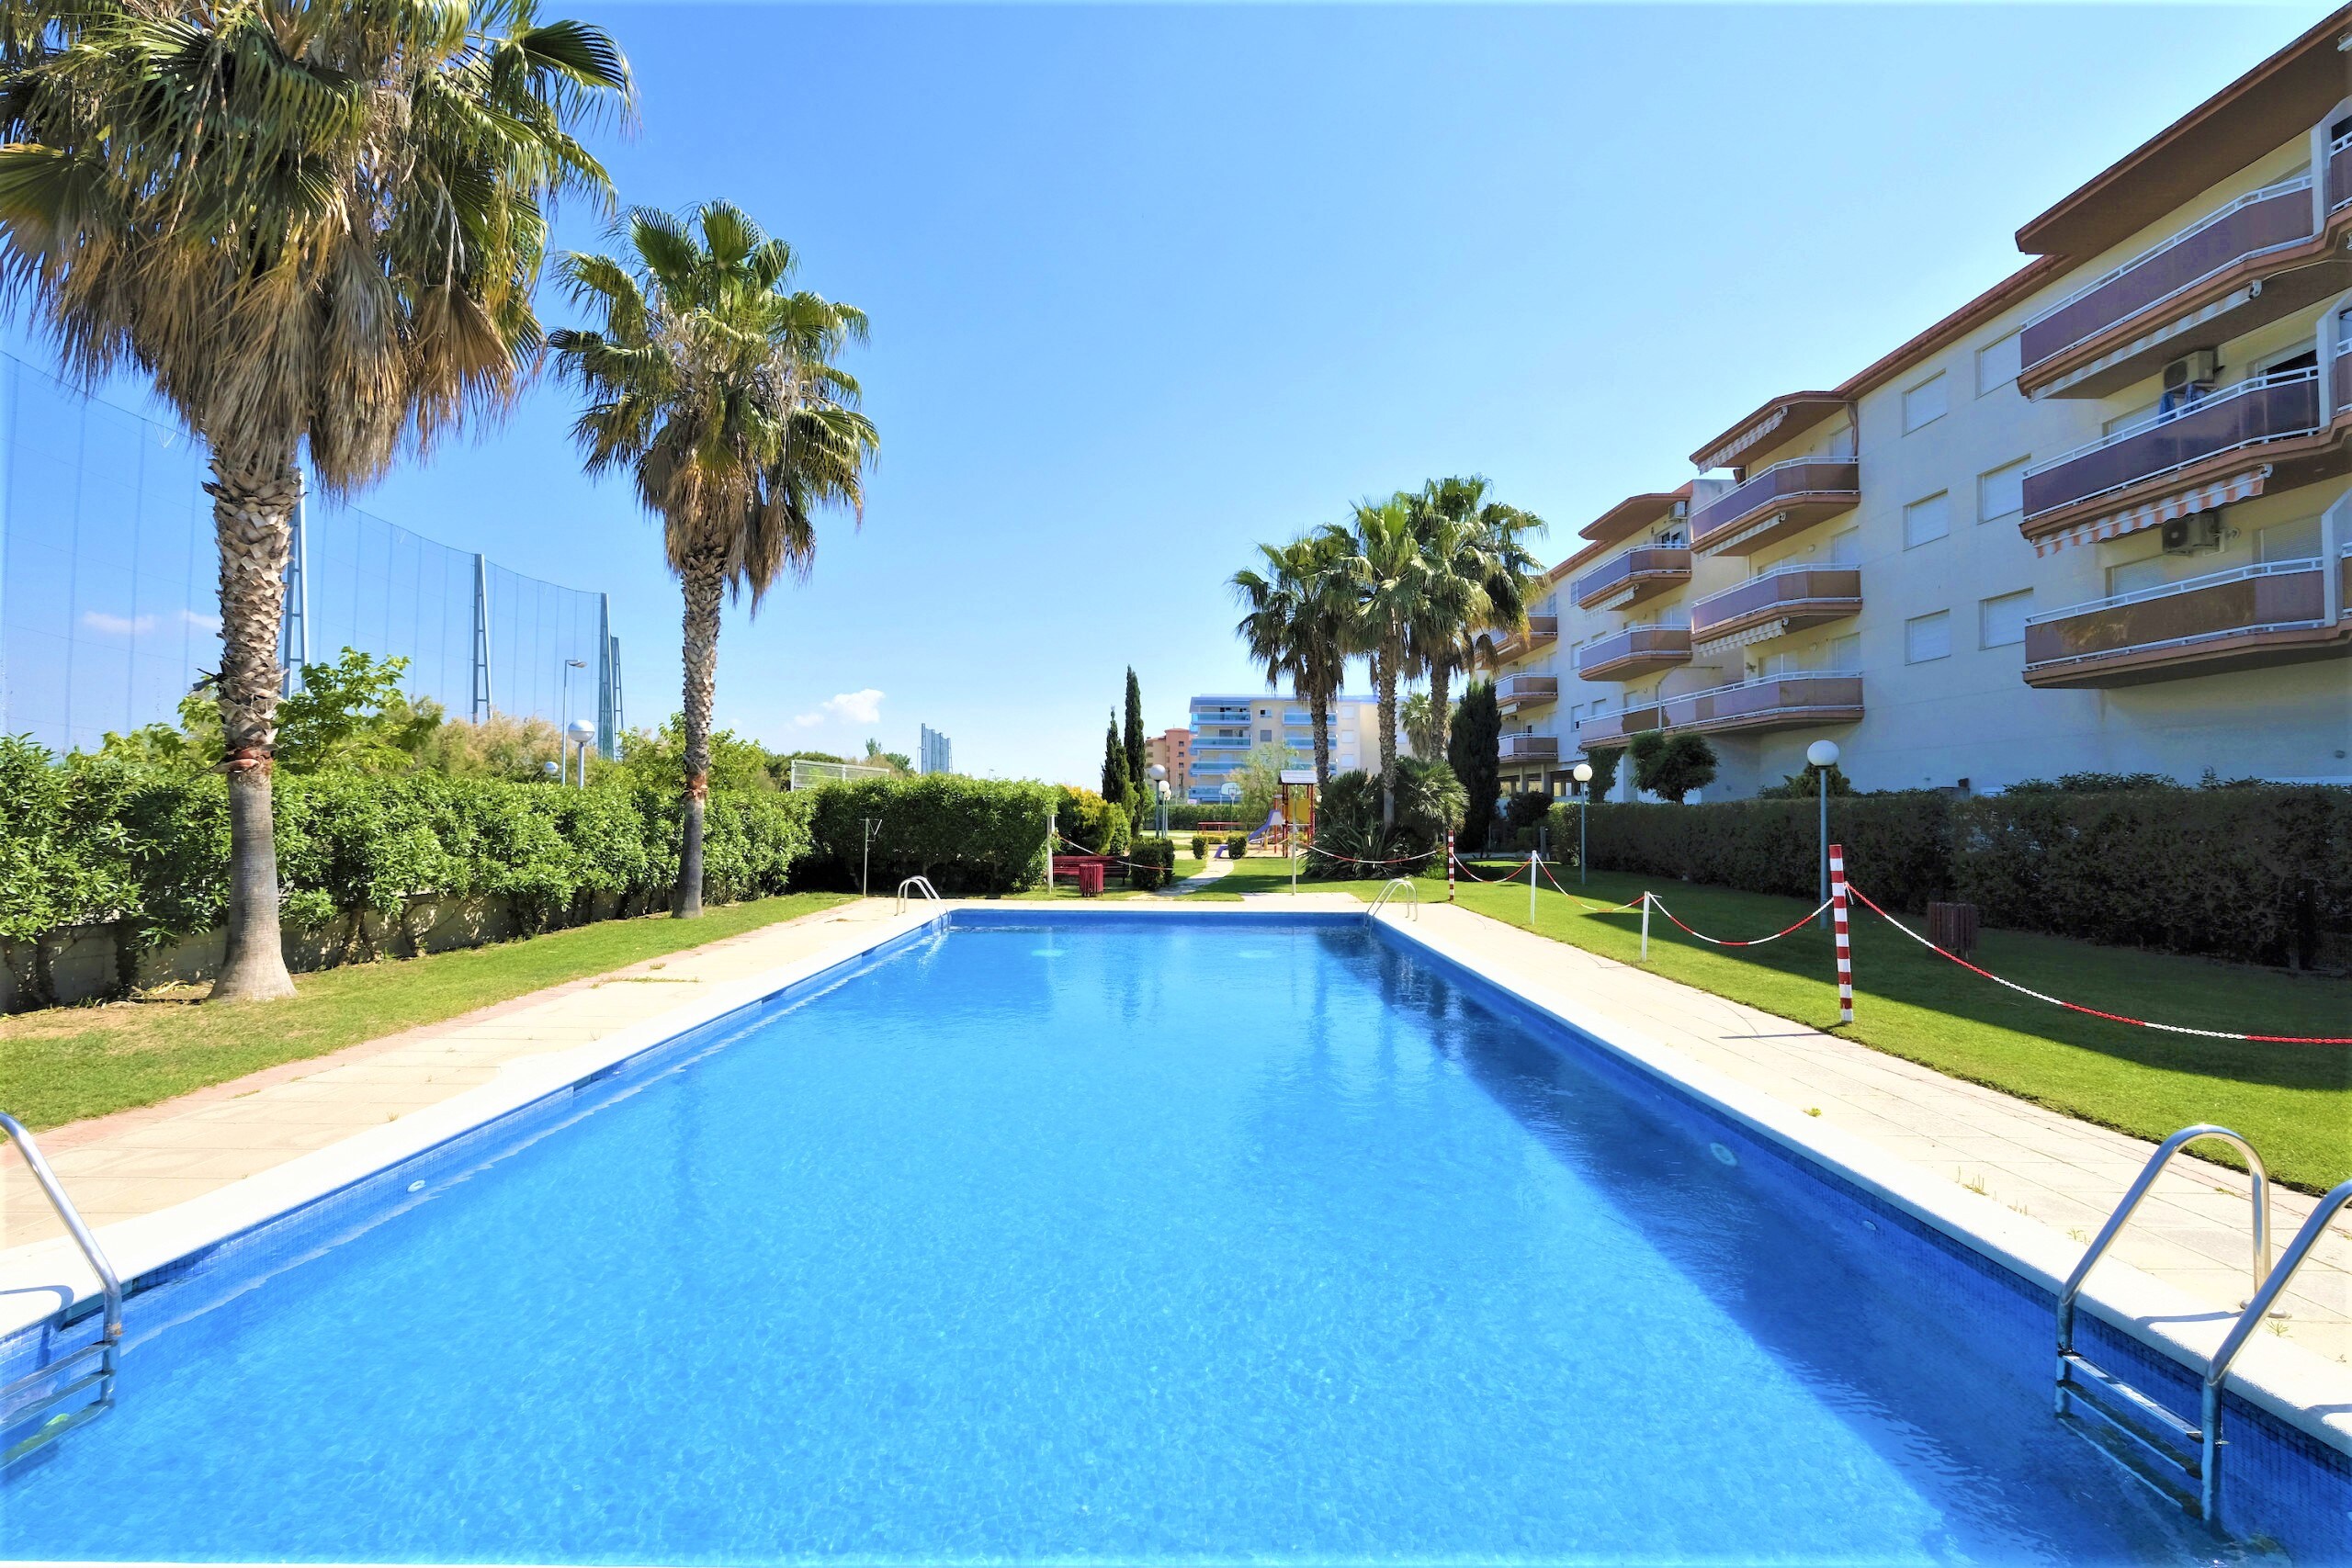 Property Image 2 - Beautiful apartment with communal pool in La Pineda